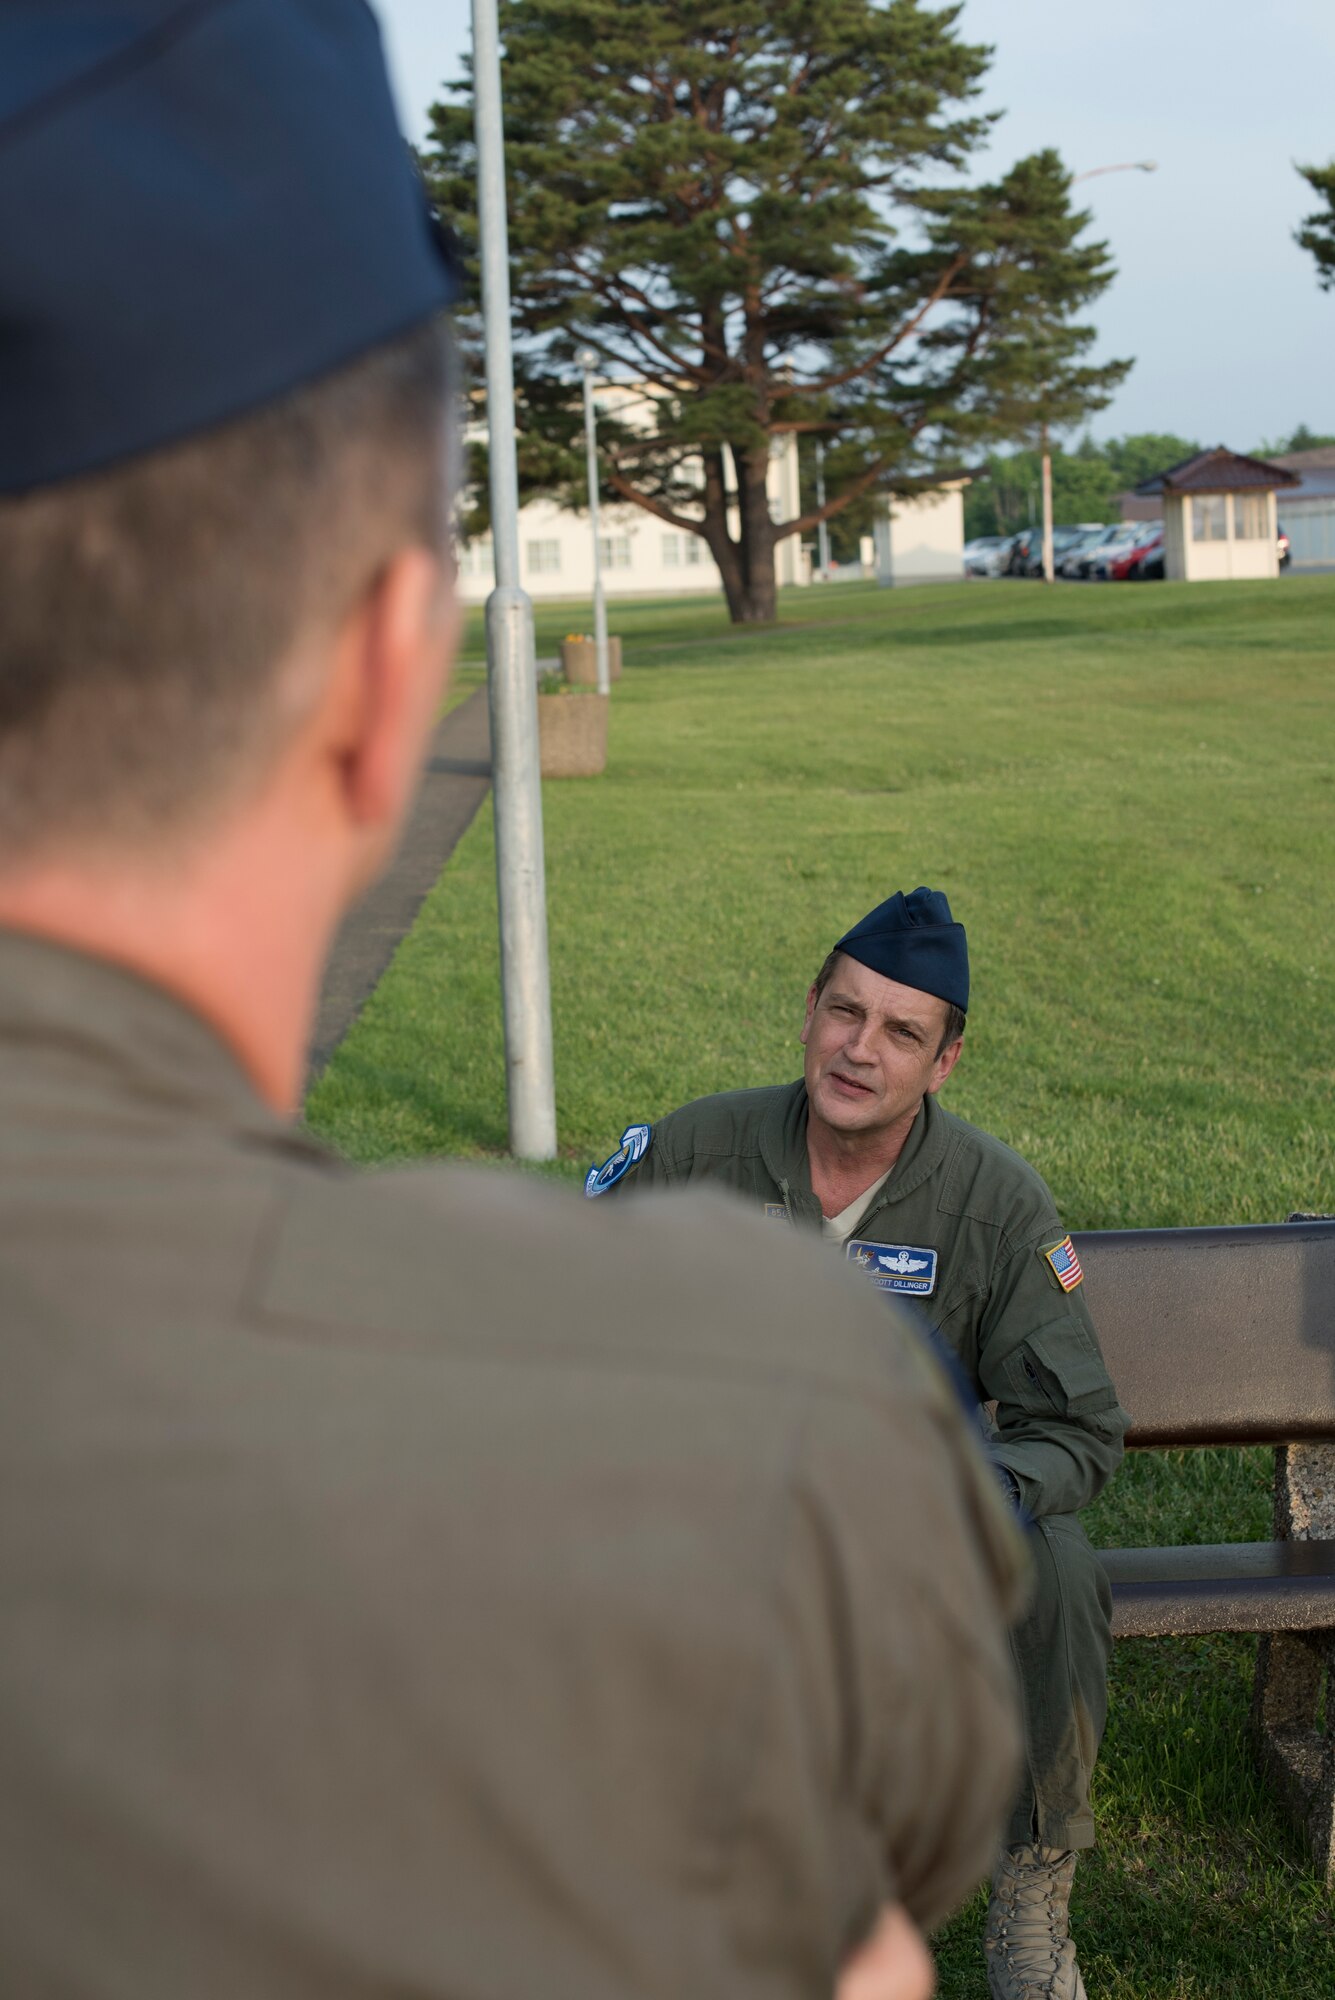 Master Sgt. Scott Dillinger, 6th Air Refueling Squadron noncommissioned officer in charge of standardization and evaluation and a KC-10 Extender flight engineer, enjoys some conversation with one of his crew members at Misawa Air Base, Japan, June 4, 2018, prior to flying a refueling mission in support of six F-15s. On June 4 he hit the 10,000 flight hour milestone. (U.S. Air Force photo by Tech. Sgt. James Hodgman)